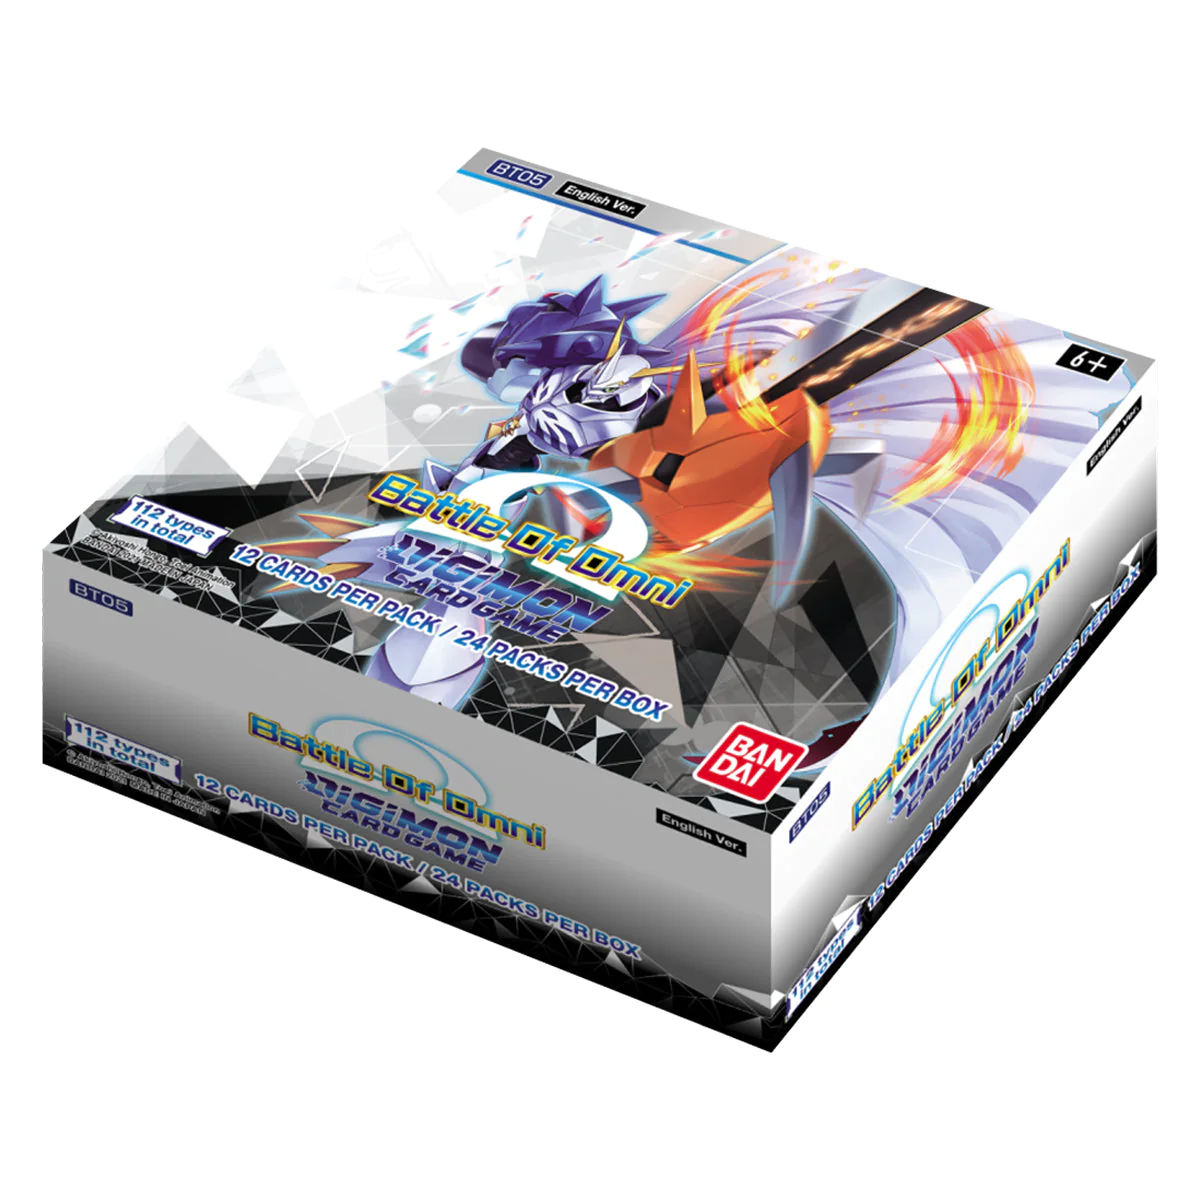 Series 05 Battle of Omni BT05 Booster Box Digimon Card Game